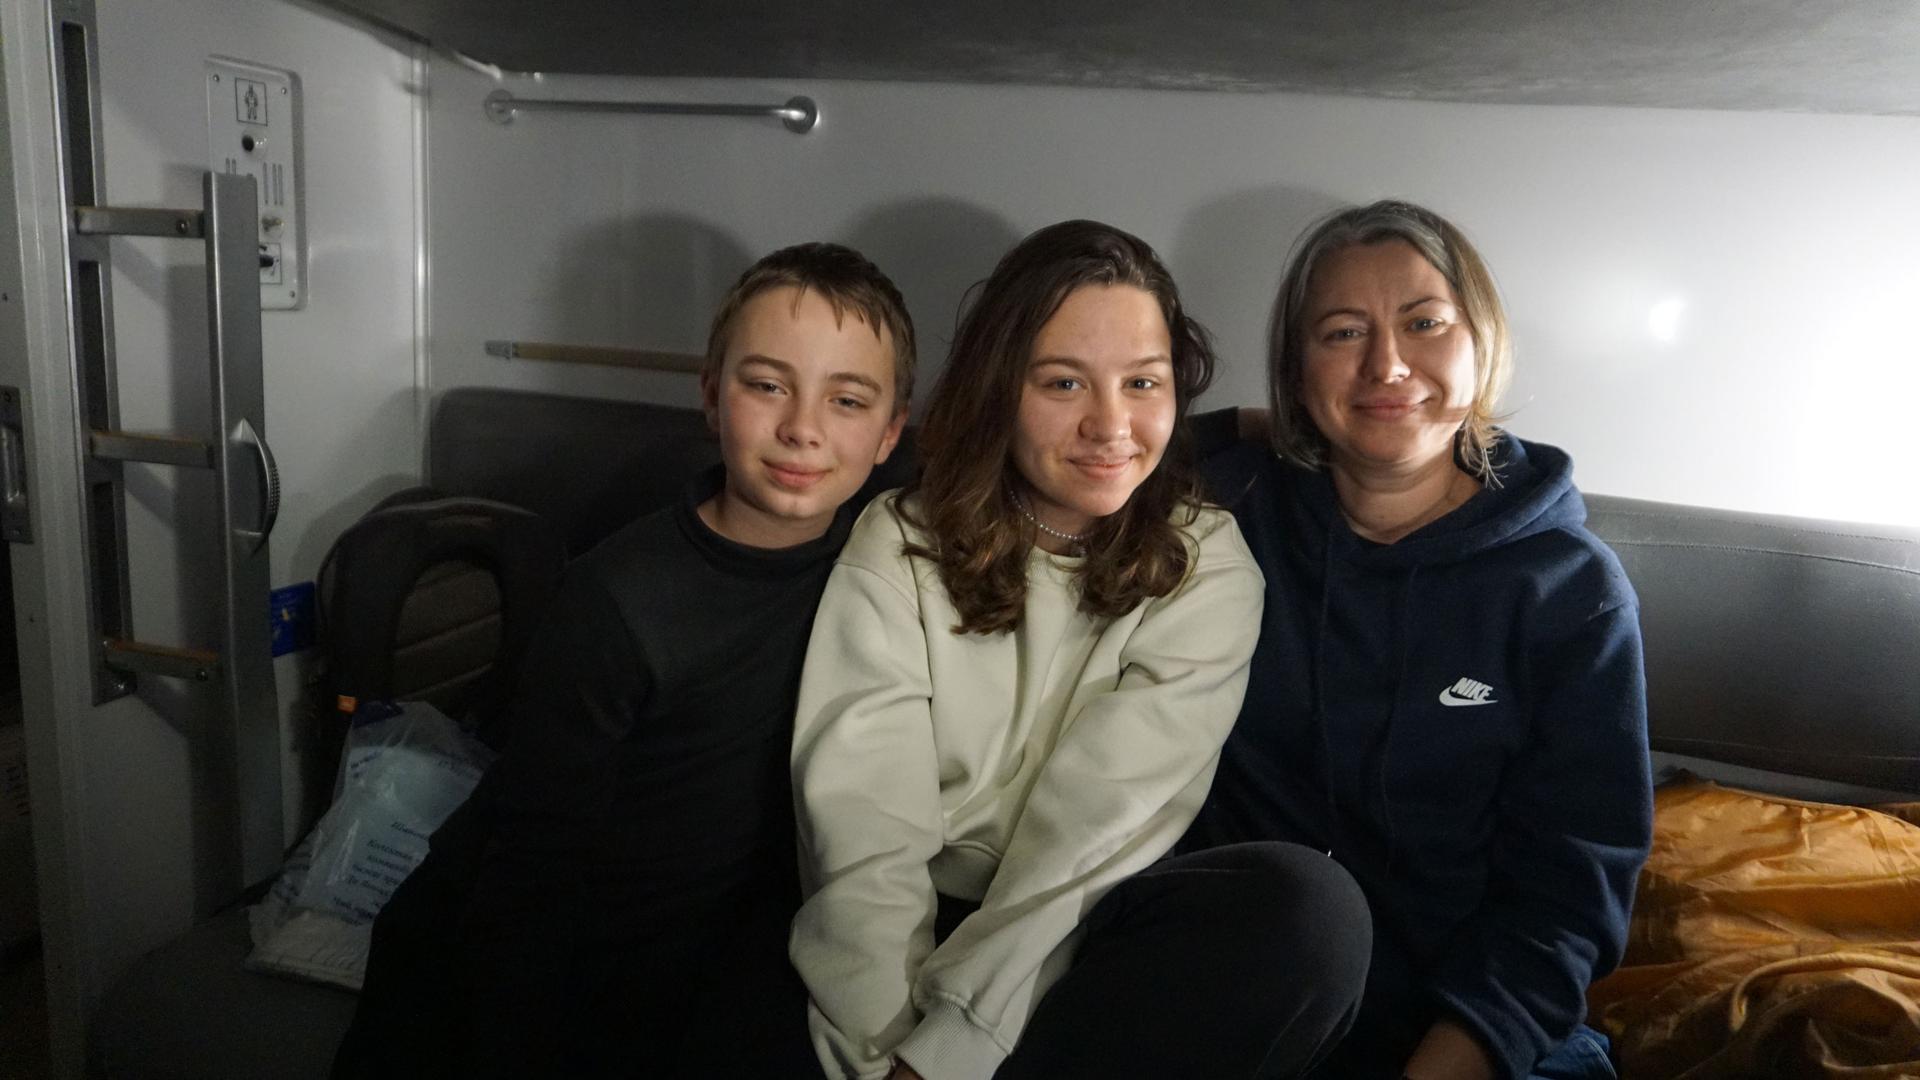 The Talyzenkov family, currently living in London, England, heads back to Ukraine for a weeklong visit.